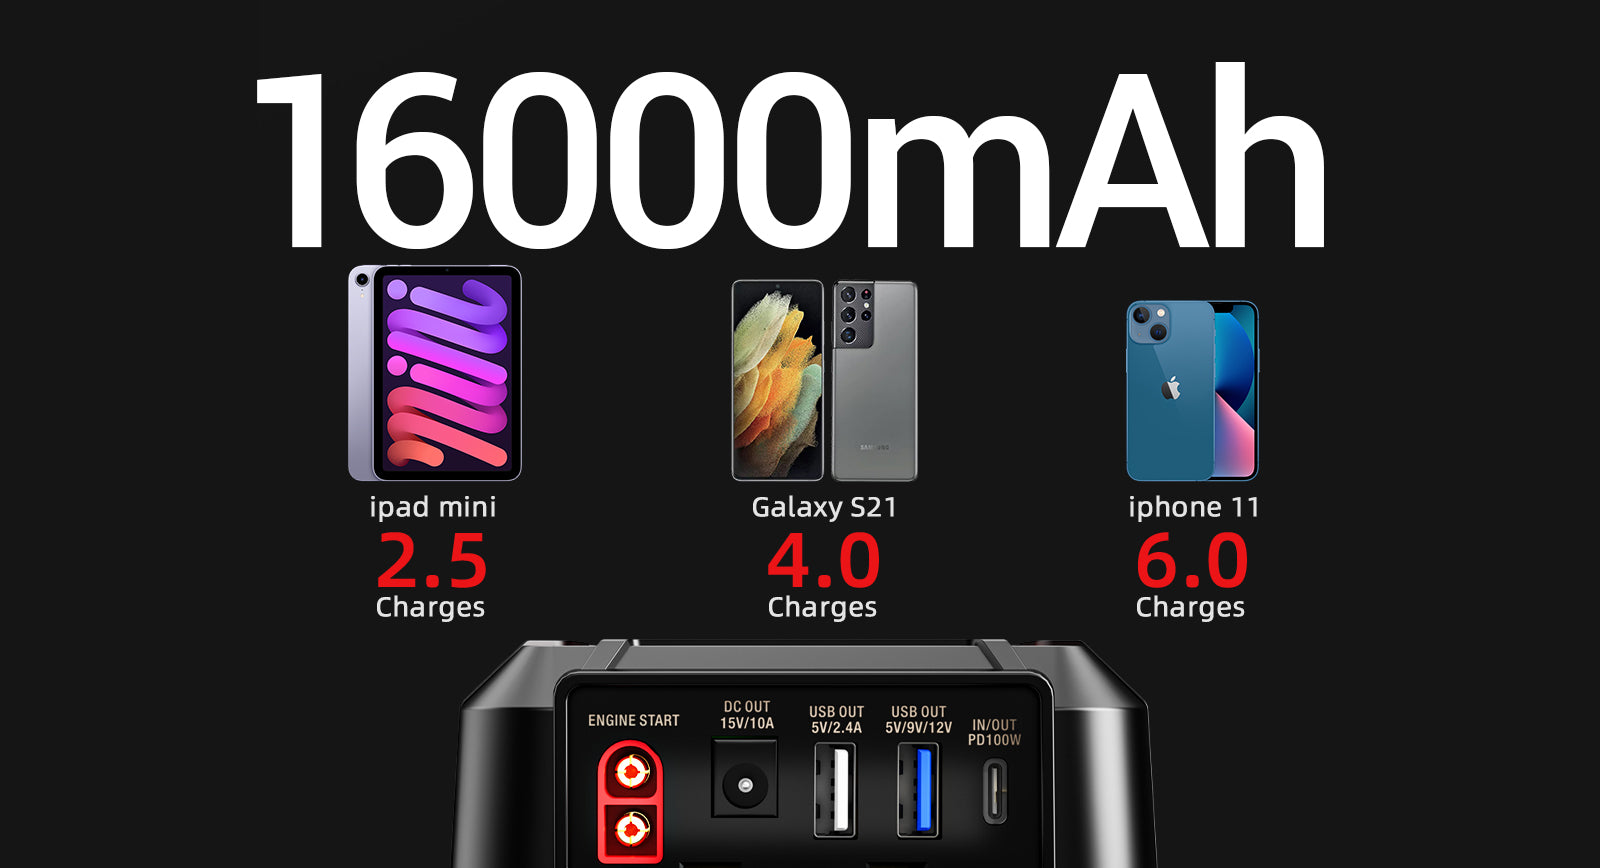 16000mAh LARGER CAPACITY TO CHARGE MULTIPLE DEVICES